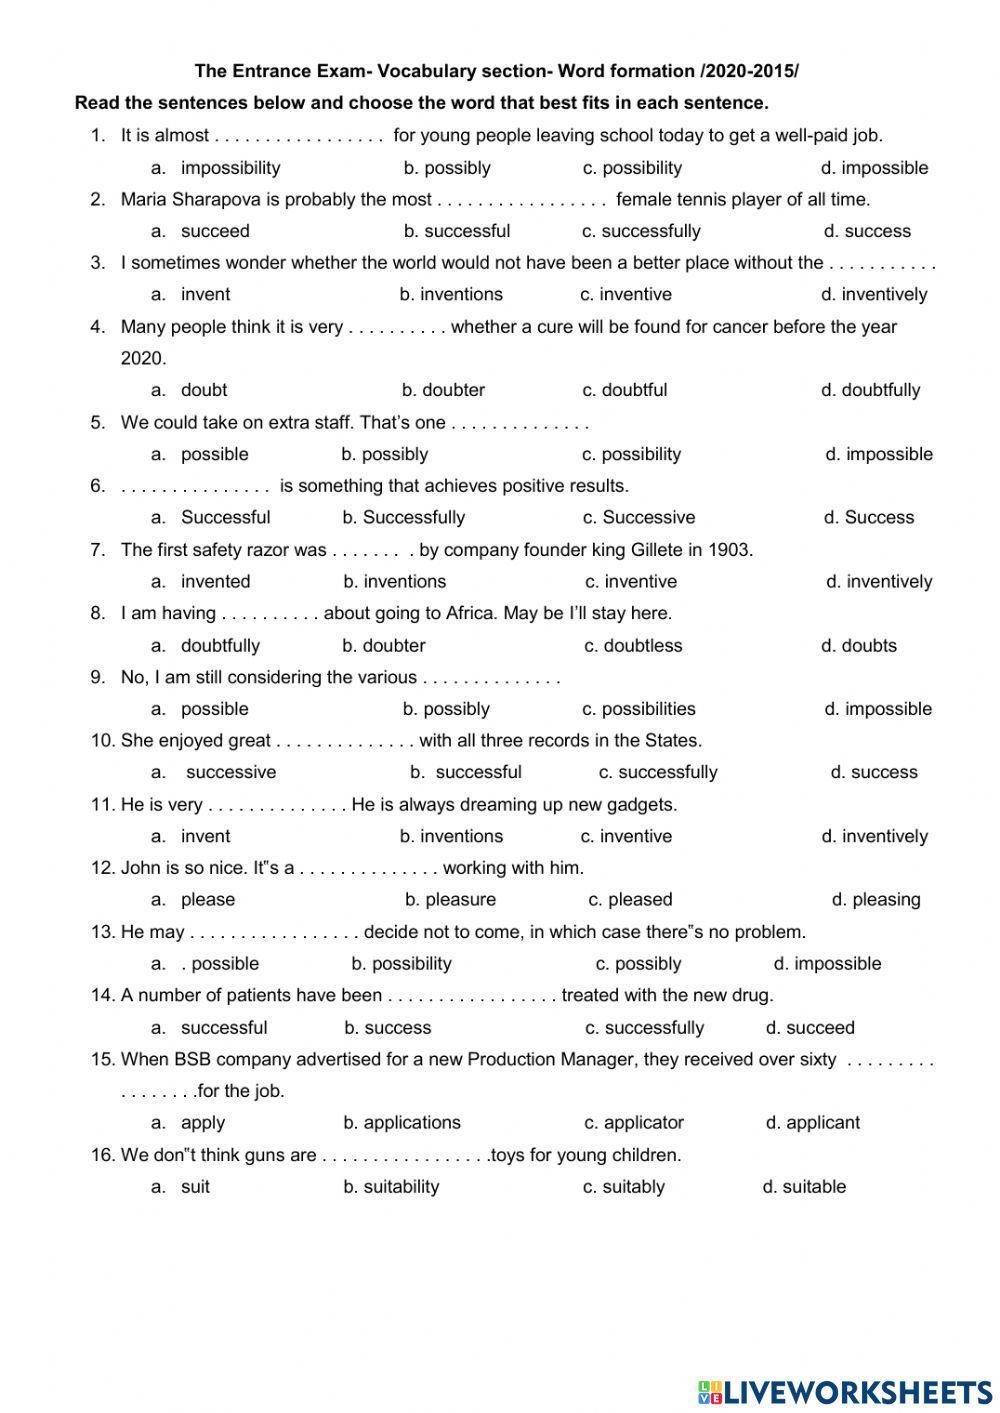 The Entrance exam Vocabulary section